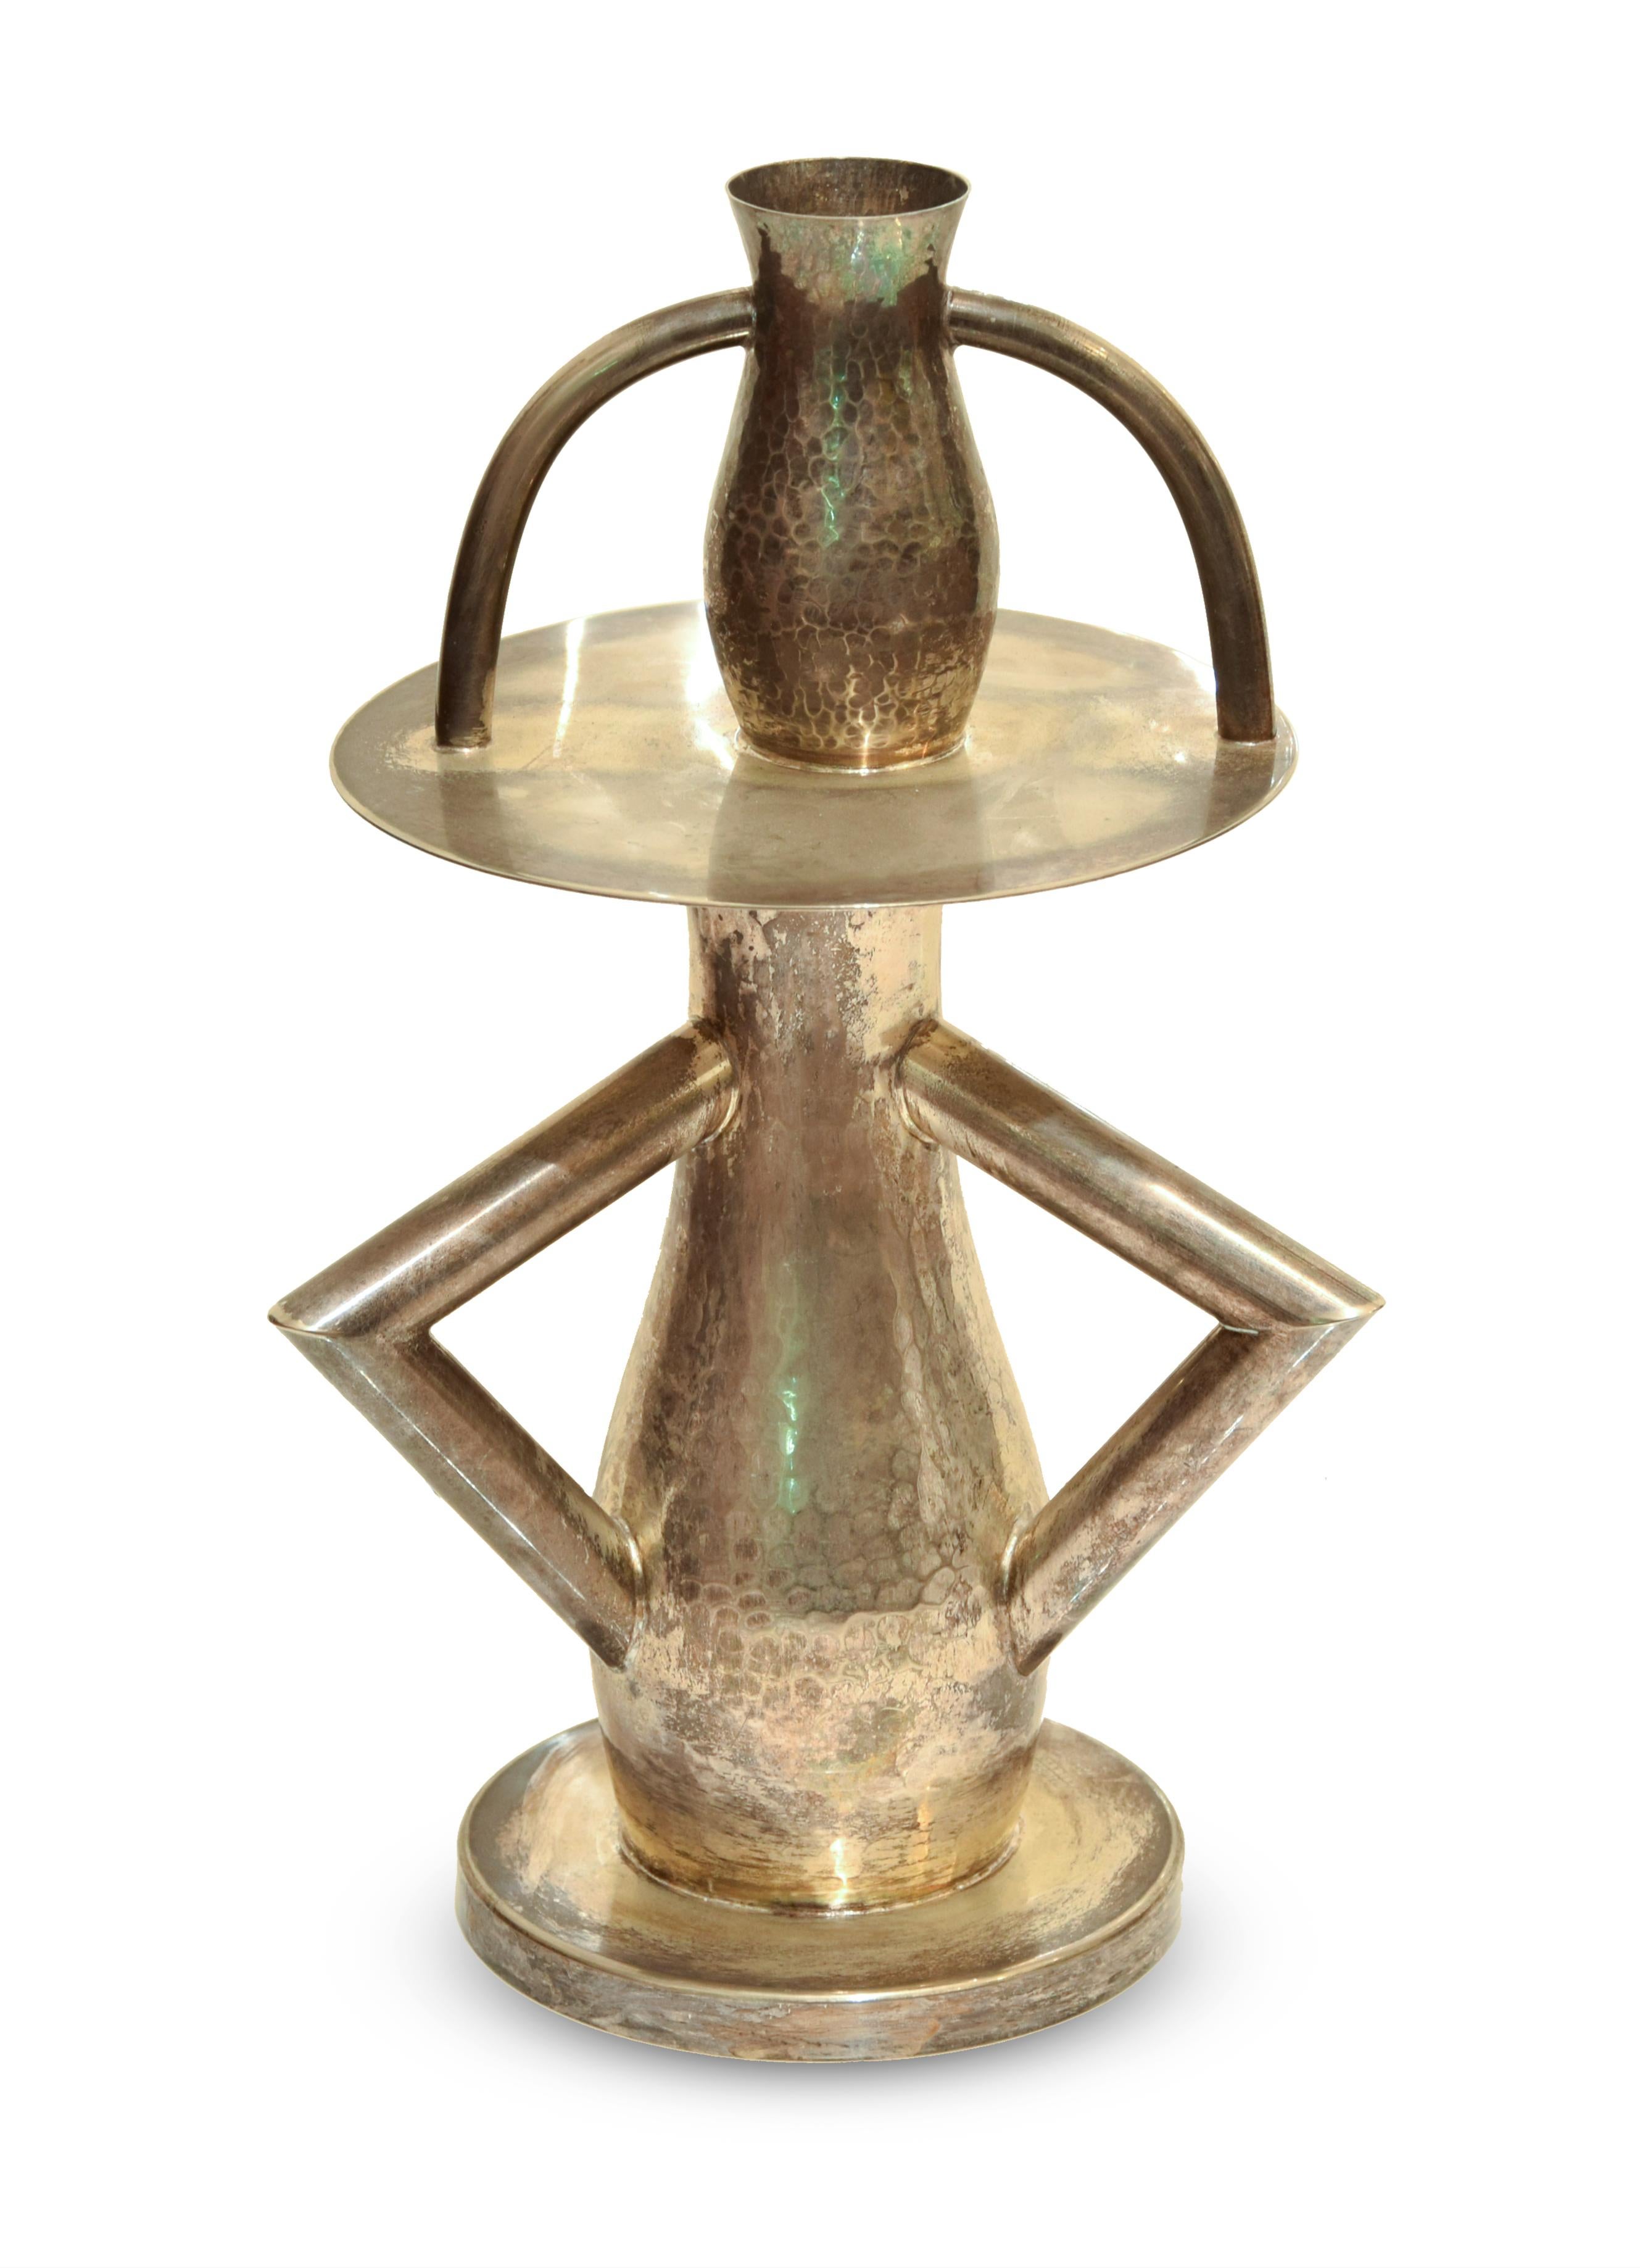 Alaska is an original decorative silver object realized and created by Ettore Sottsass in the 1980s. 

Original silver candlestick realized in 1981. 

Made in Italy.

The label of authenticity is impressed on the base of the work.